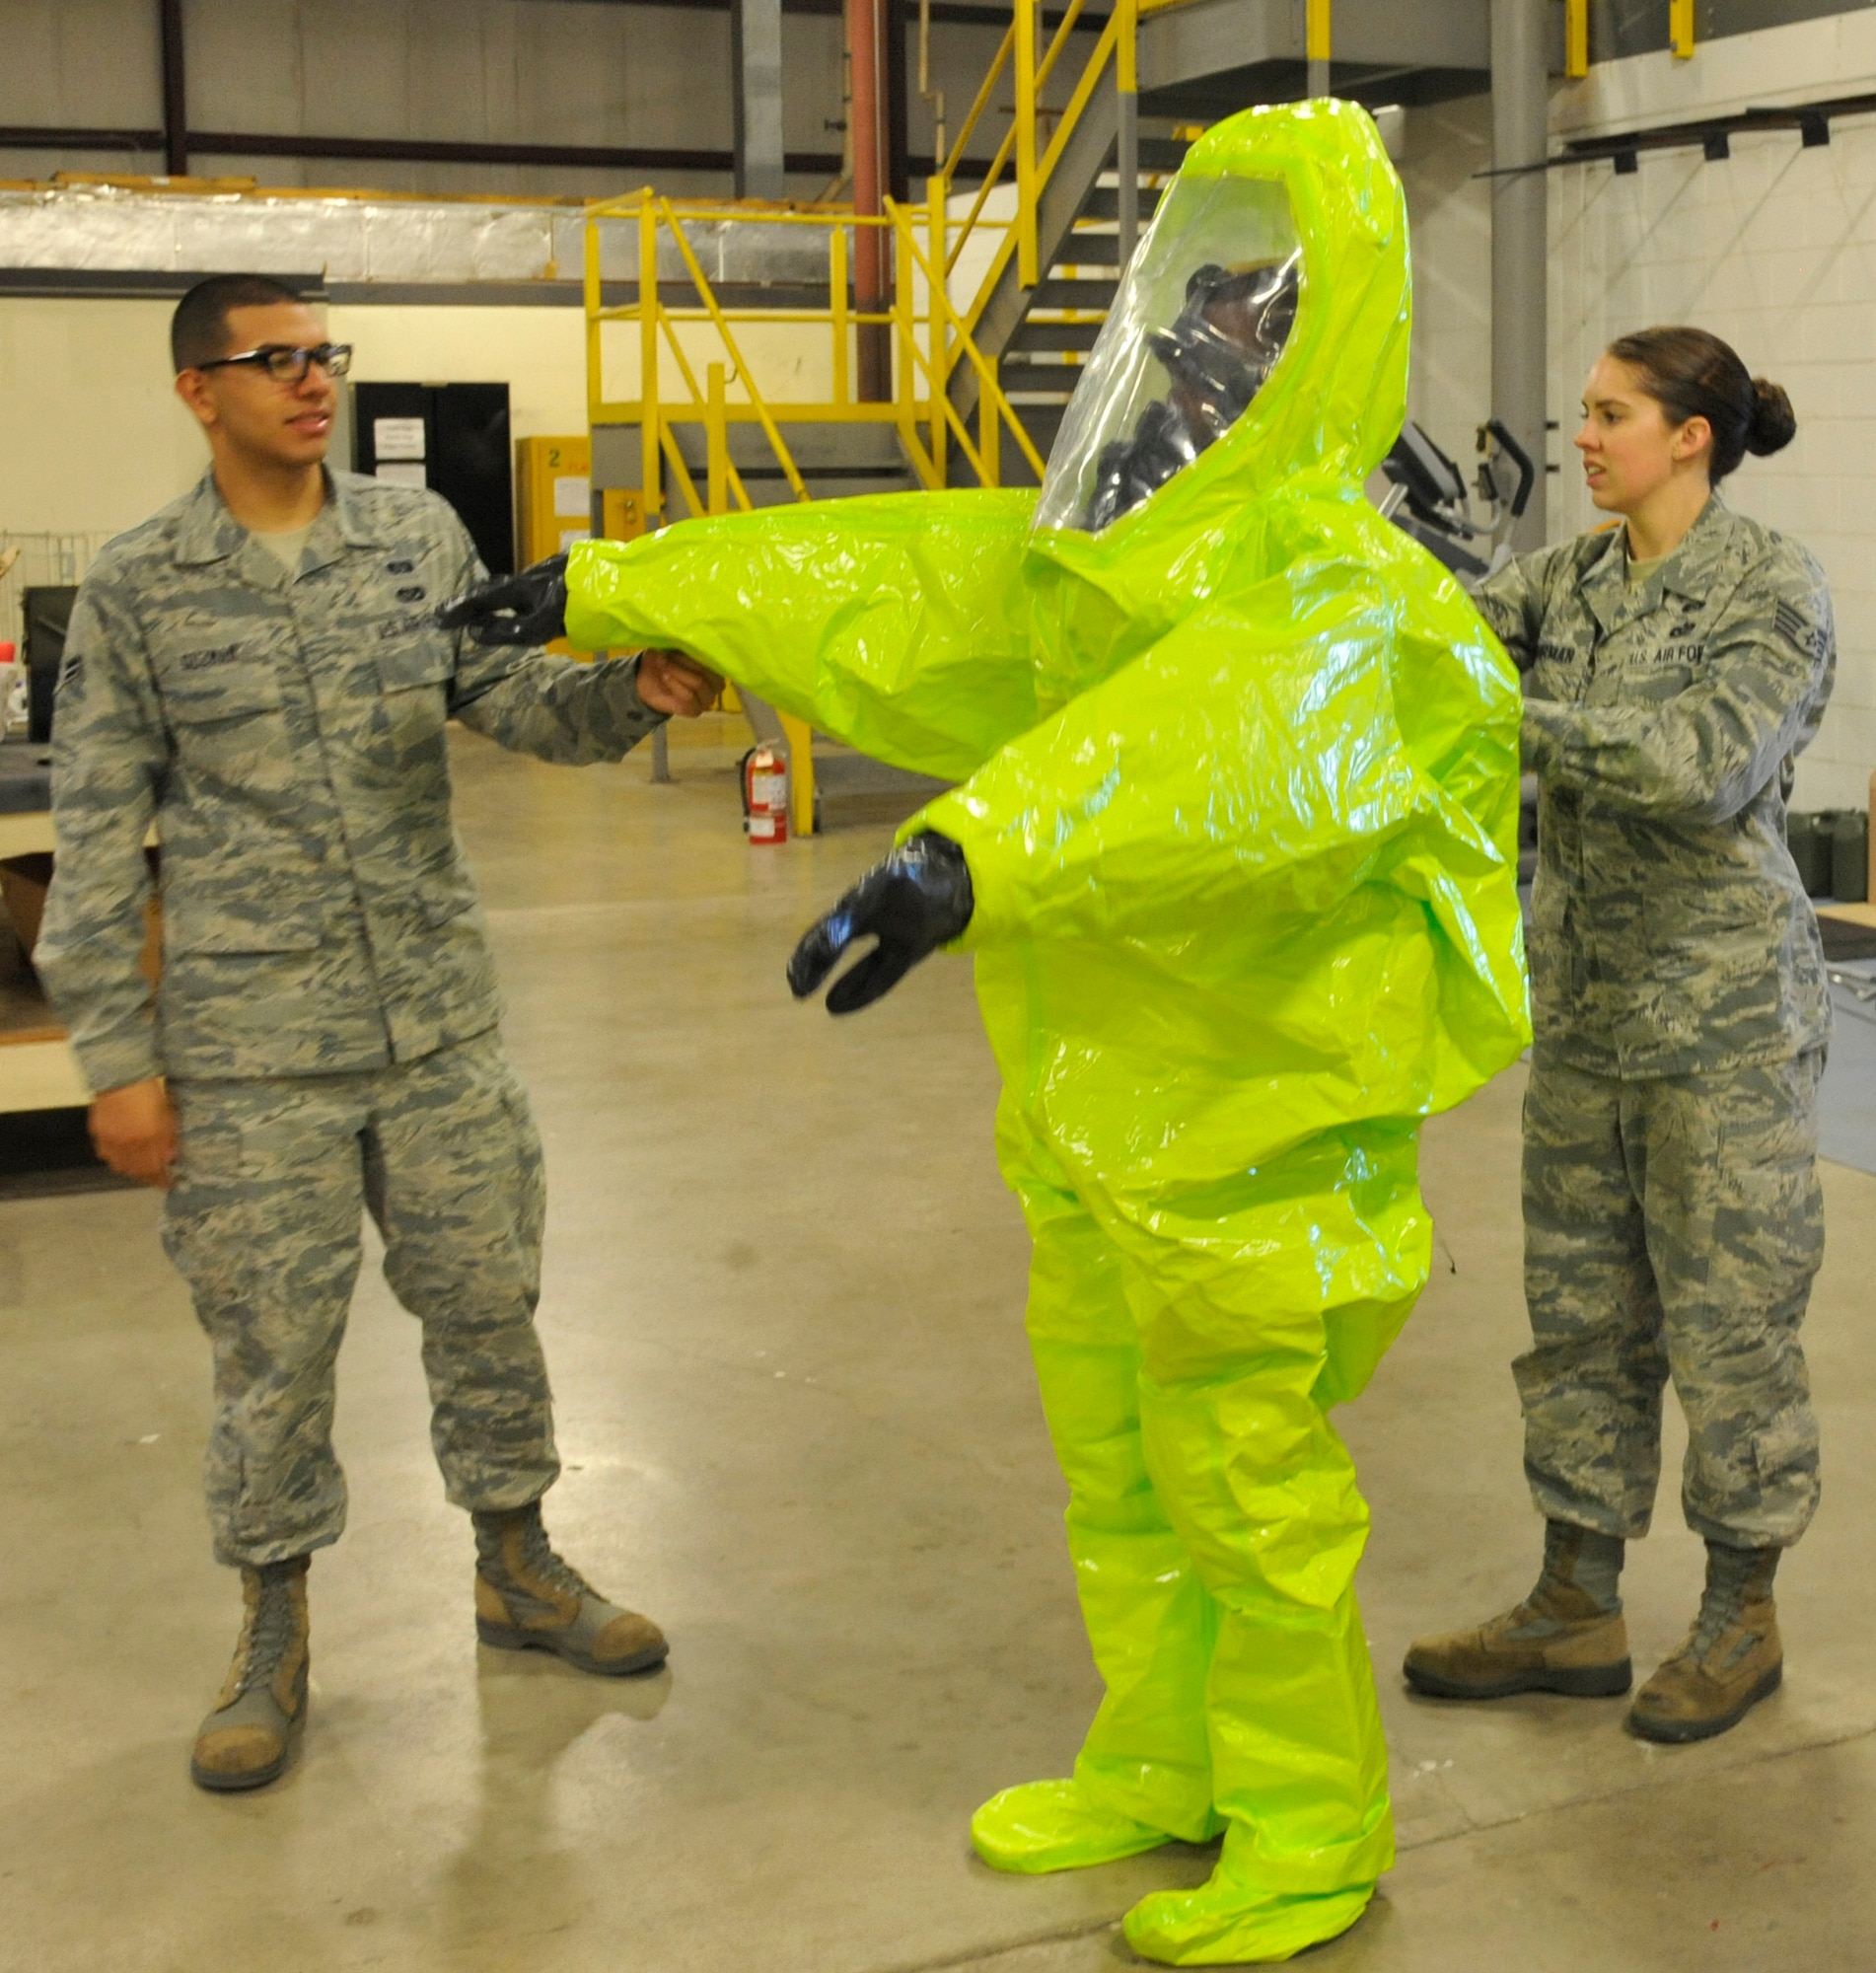 Staff Sgt. Rebecca Buhrman, 509th Civil Engineer Squadron NCO in charge of emergency management logistics, and Airman 1st Class Alfredo Guzman, 509th CES journeyman, assist Airman 1st Class Brandon Stone, 509th CES apprentice, with putting on a Level-A suit at Whiteman Air Force Base, Mo., May 22, 2013. Airmen wear this fully-encapsulated, chemical-resistant suit to enter hazardous or contaminated environments, as it is designed to prevent any air from entering or exiting. (U.S. Air Force photo by Airman 1st Class Keenan Berry/Released)